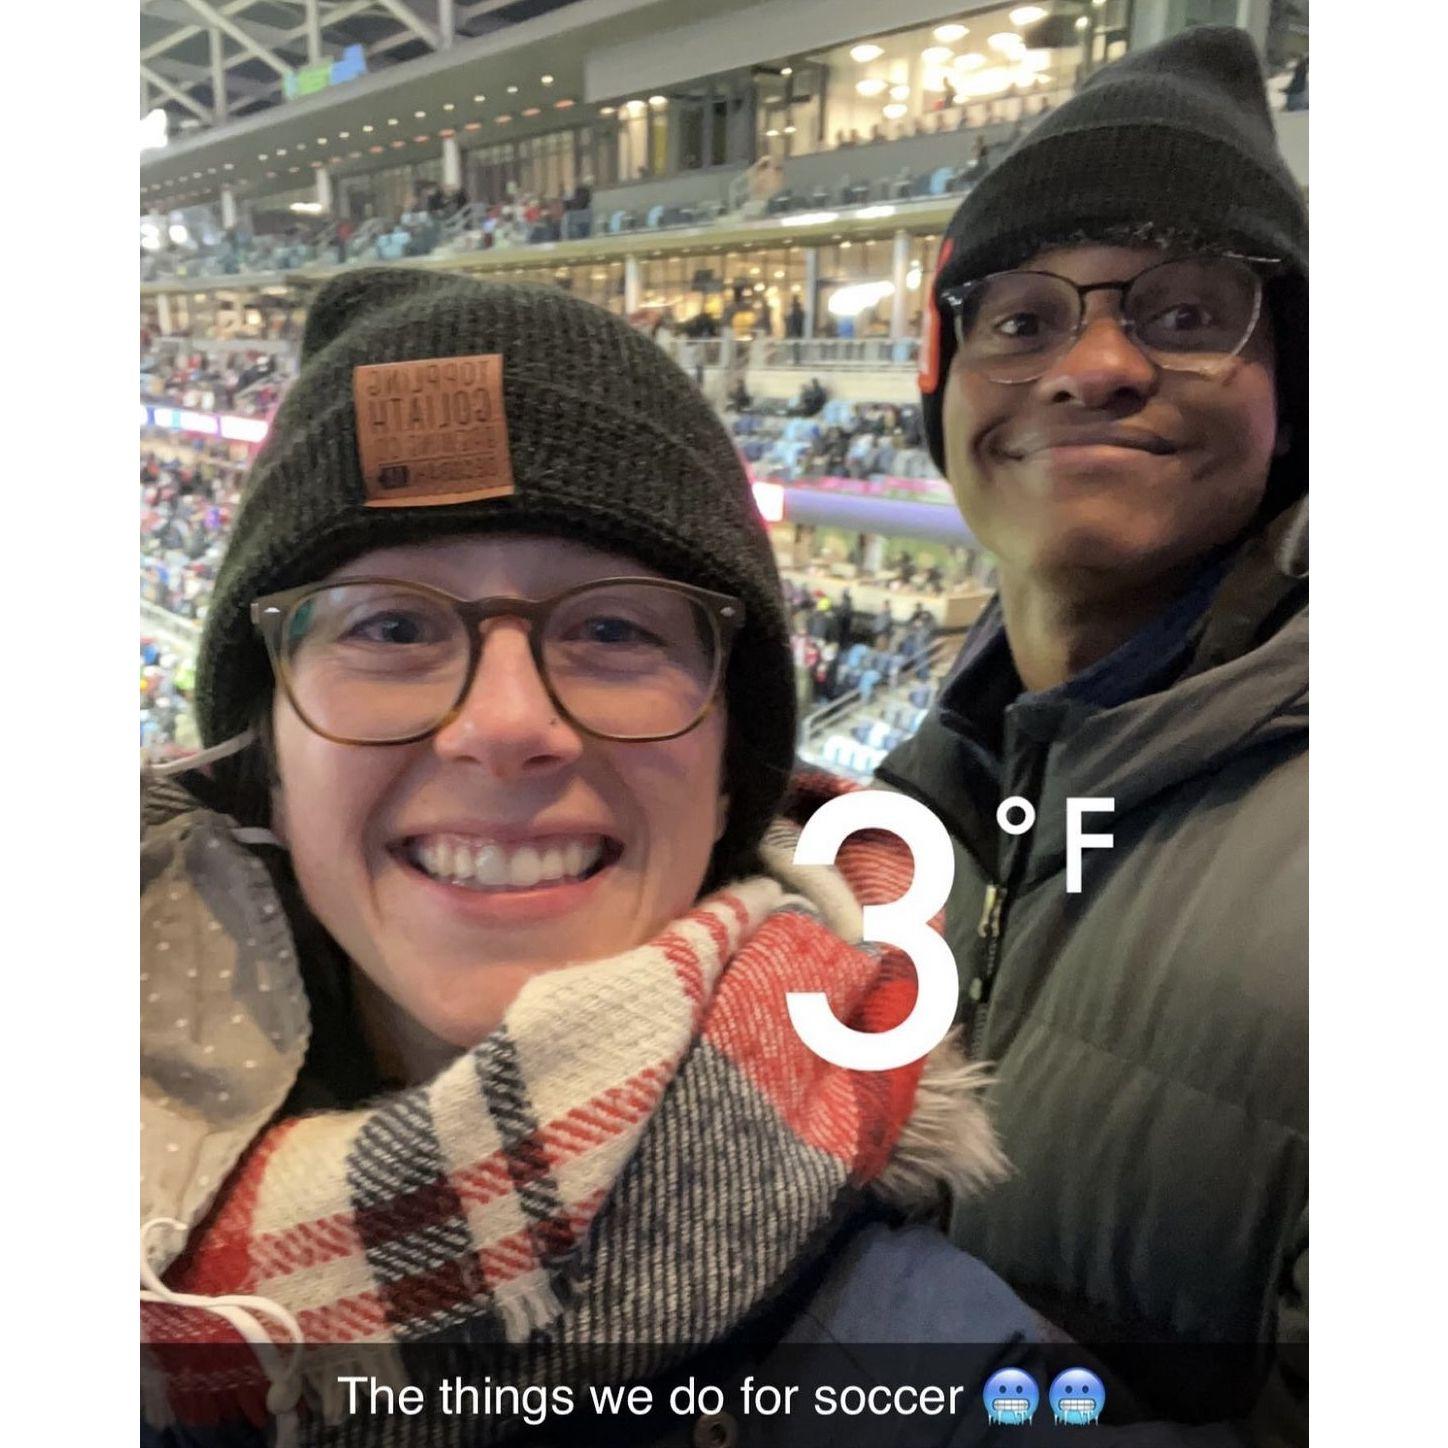 Froze every part of our body at the Men's USA v. Honduras World Cup Qualifier. We saw Pulisic score, so it was worth it.